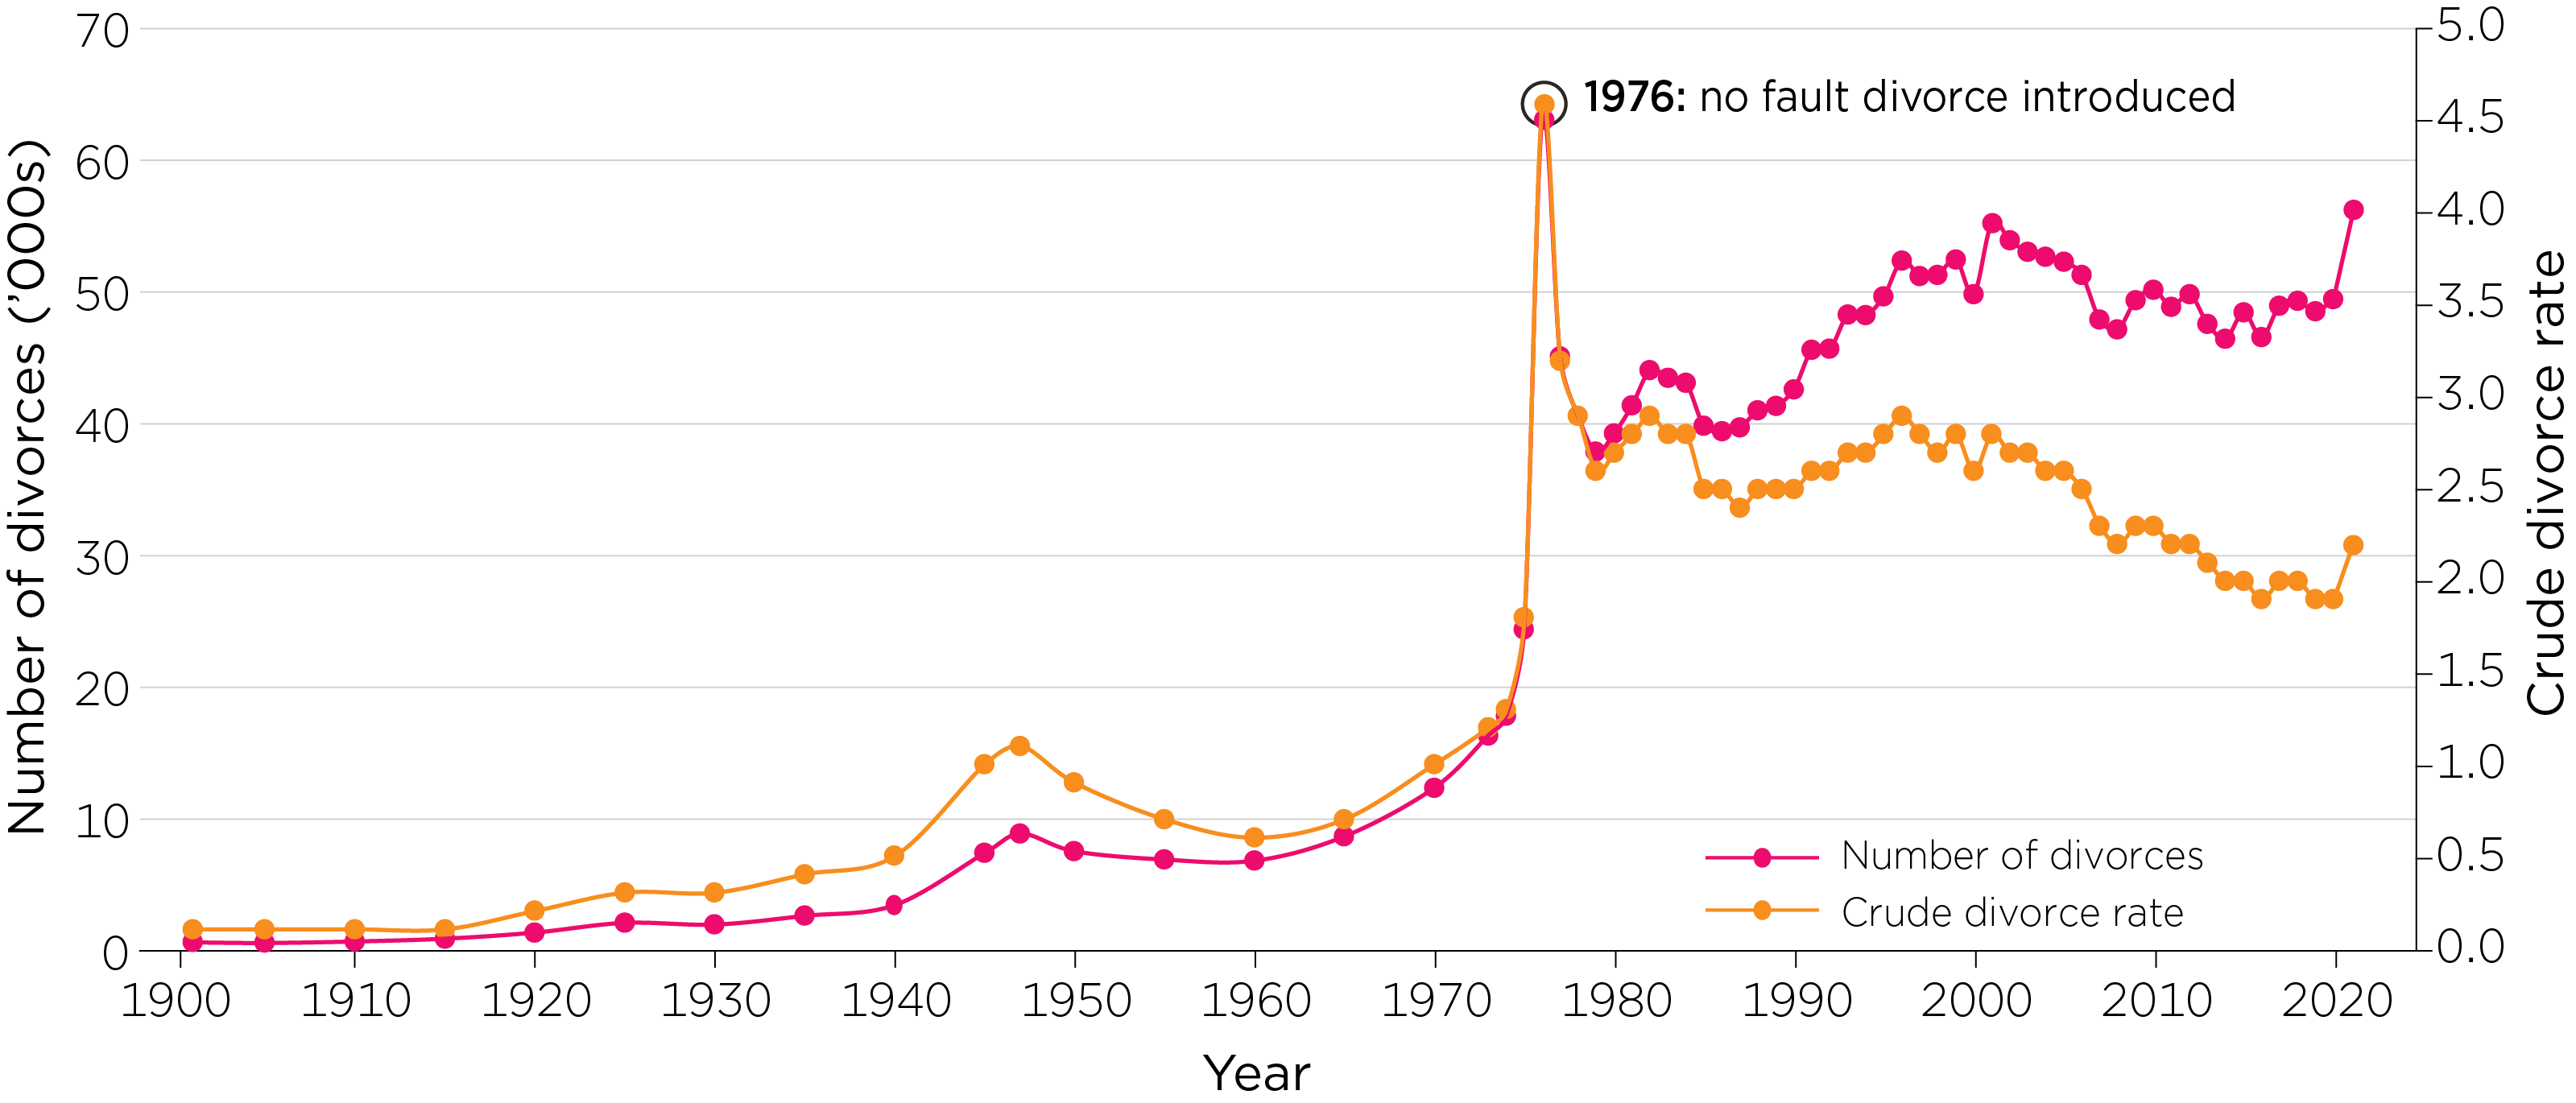 Complex chart showing the number of divorces and crude divorce rate from 1901 to 2021. Highlighting that in 1976 no fault divorce was introduced.